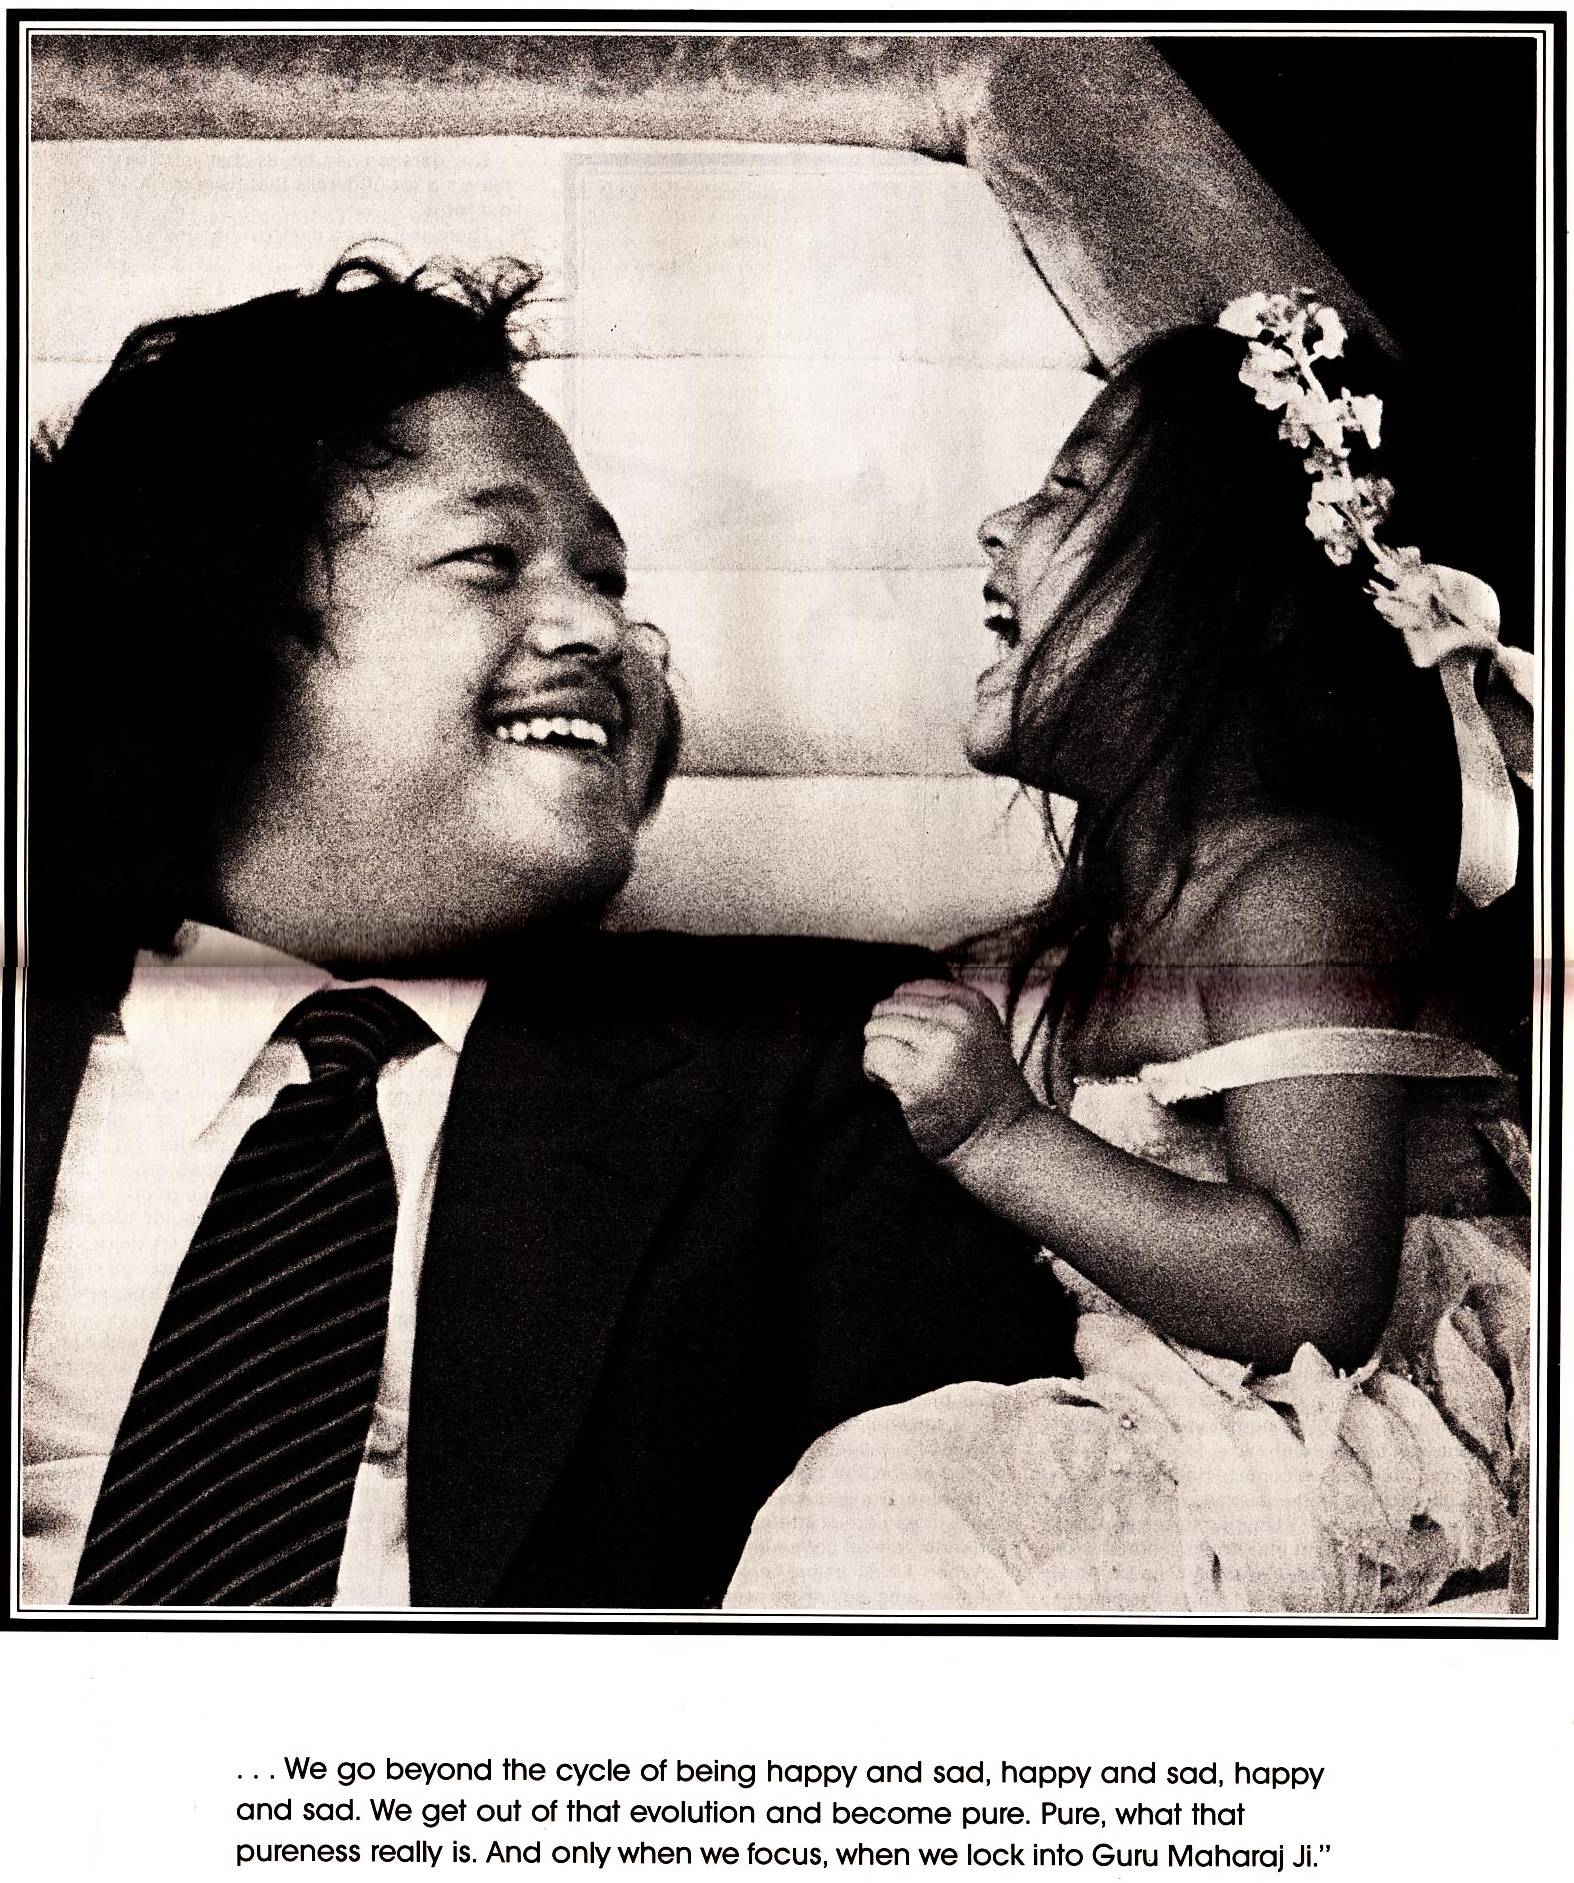 Prem Rawat Inspirational Speaker On Stage at Hans Jayanti With Daughter 1978